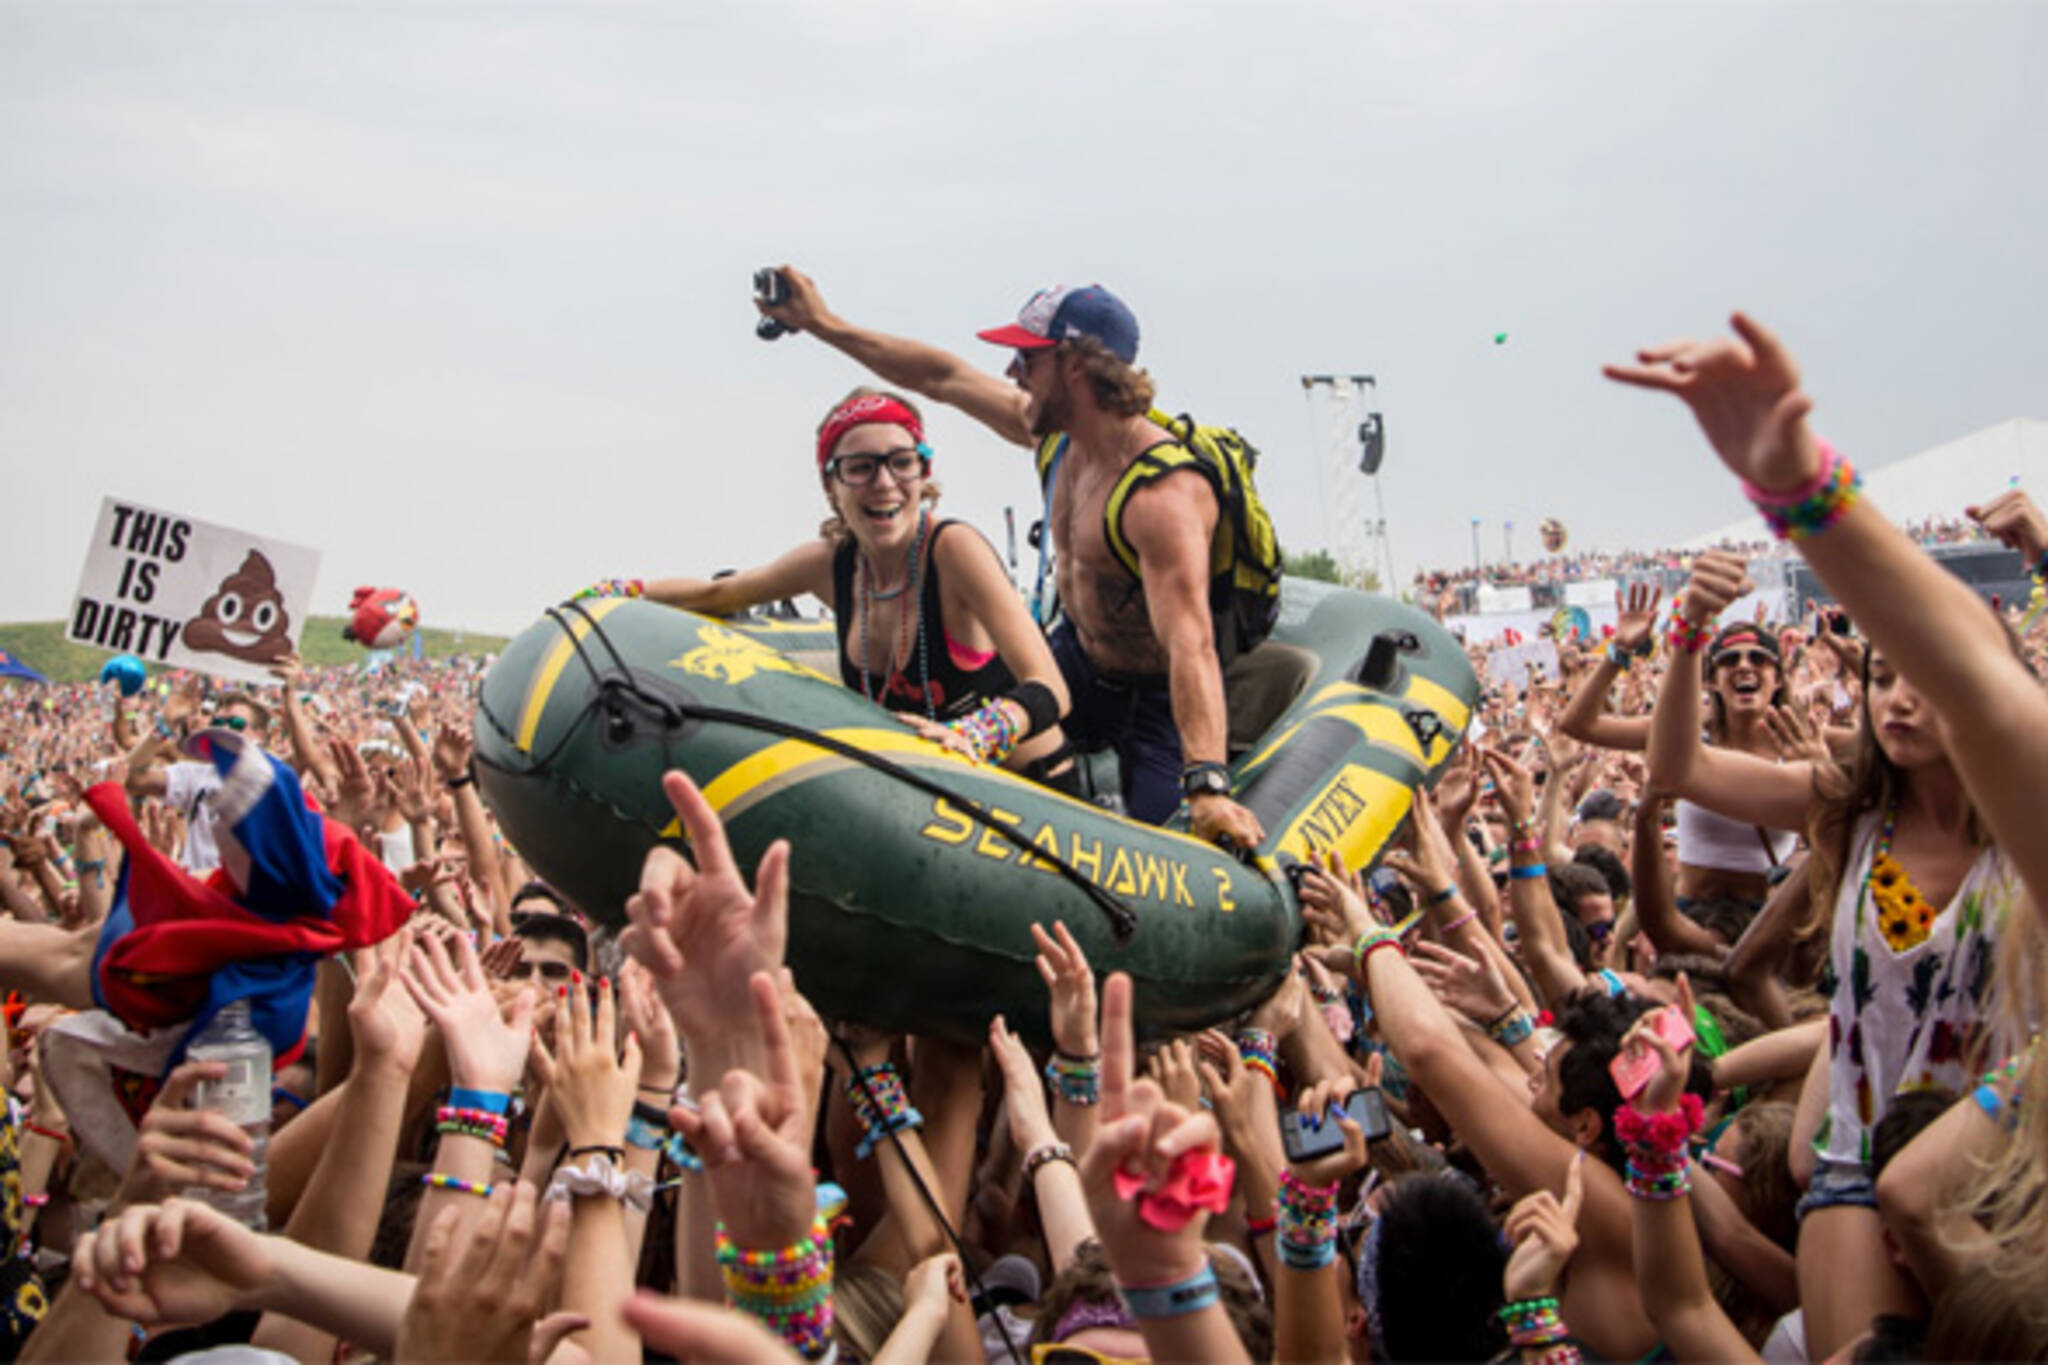 The top 10 dance music festivals in Toronto for 2015